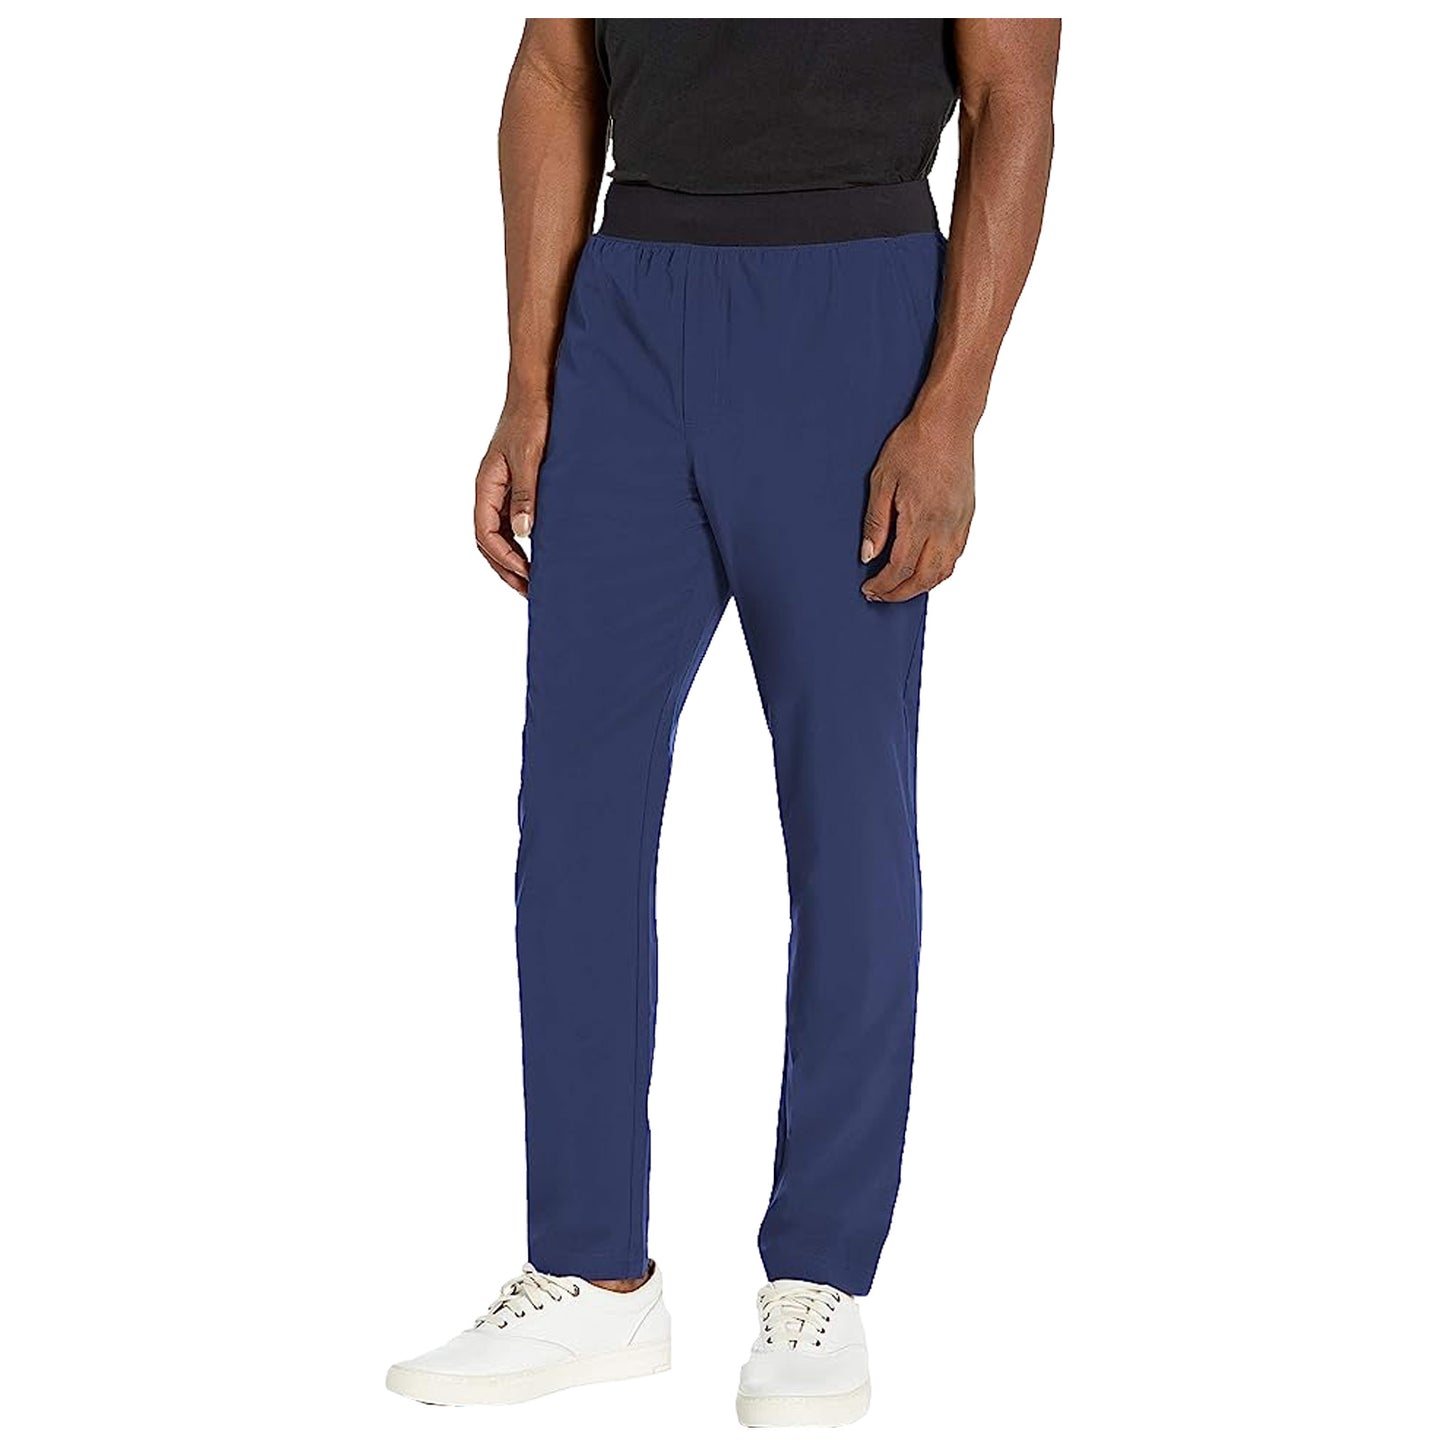 Skechers Mens Action Trousers